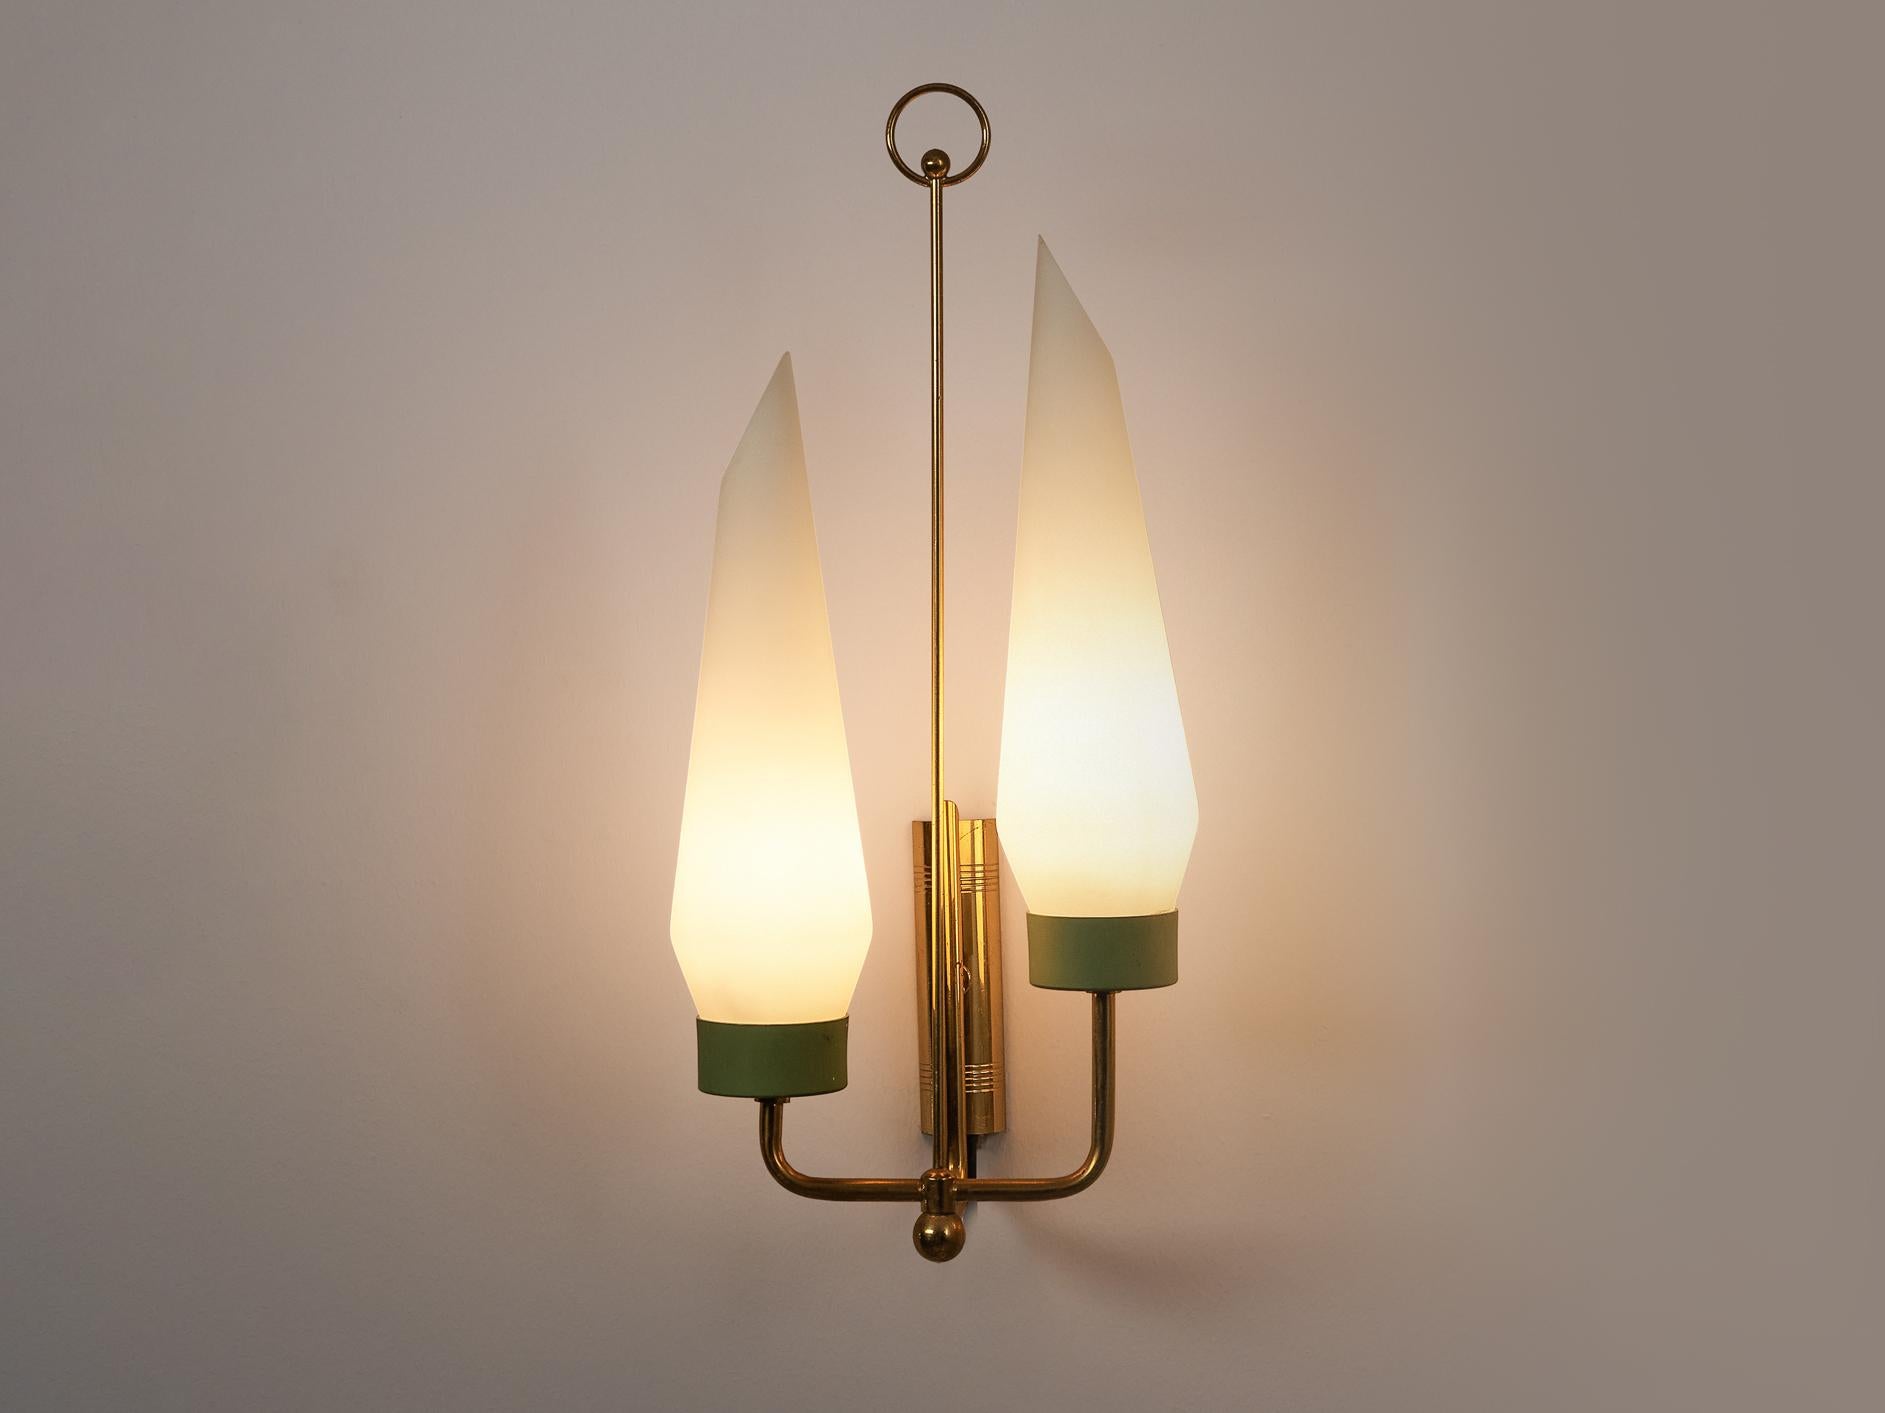 Wall light, opaline glass, brass, aluminum, Italy, 1950s

Elegant wall light made in Italy in the 1950s. This piece is made in the shape of a curved brass fixture that holds the opaline glass shades. The chamfered top and the widened body of the